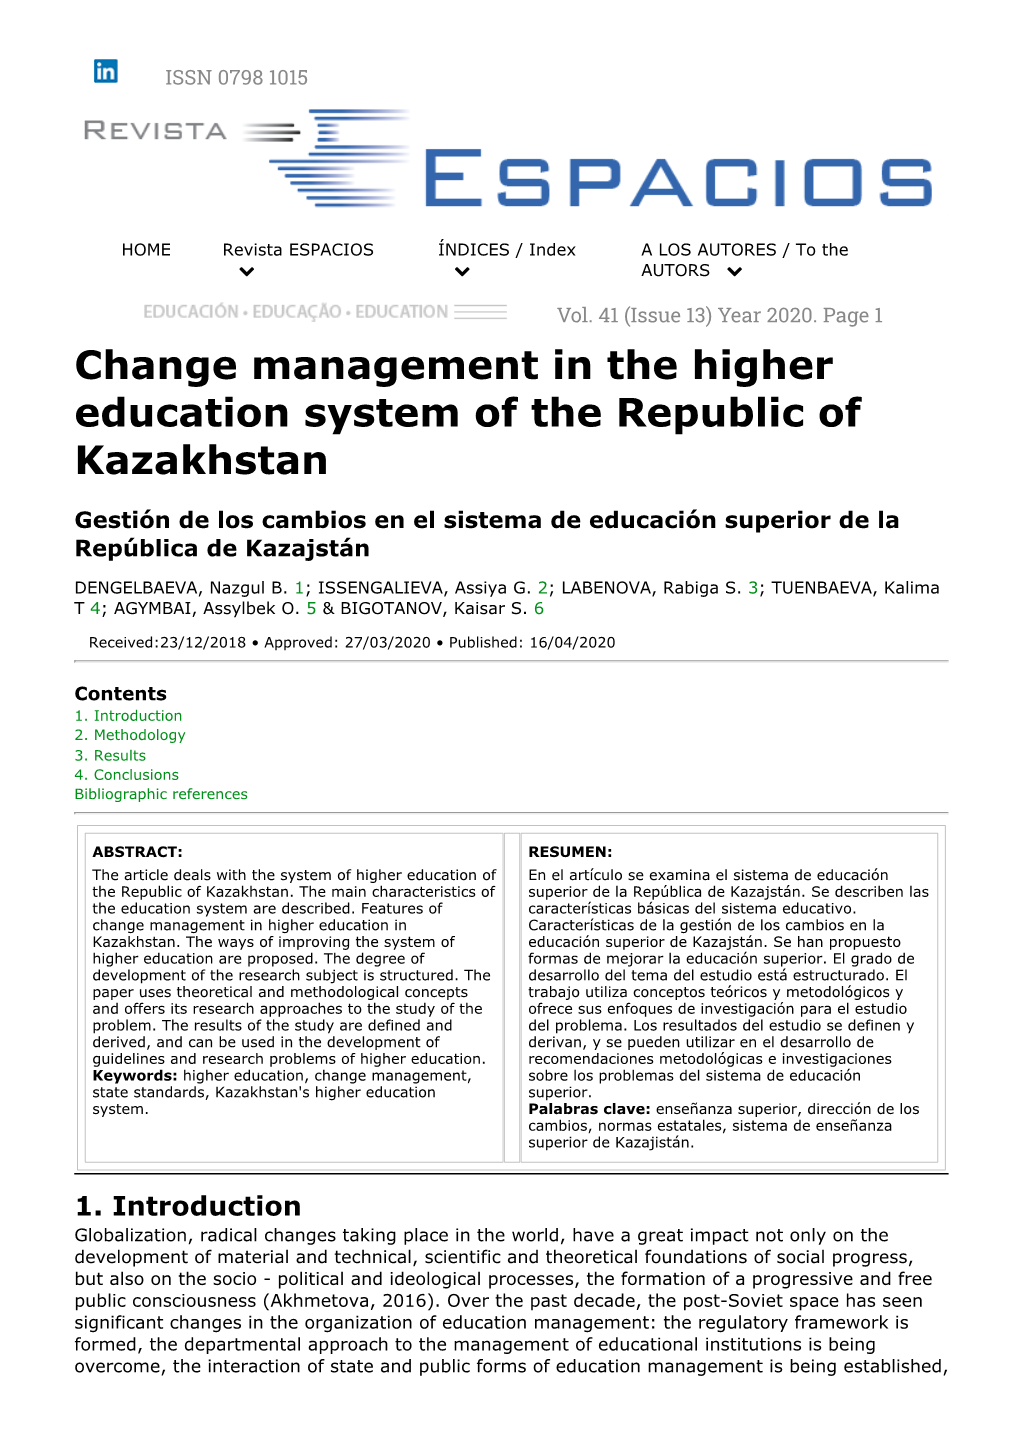 Change Management in the Higher Education System of the Republic of Kazakhstan